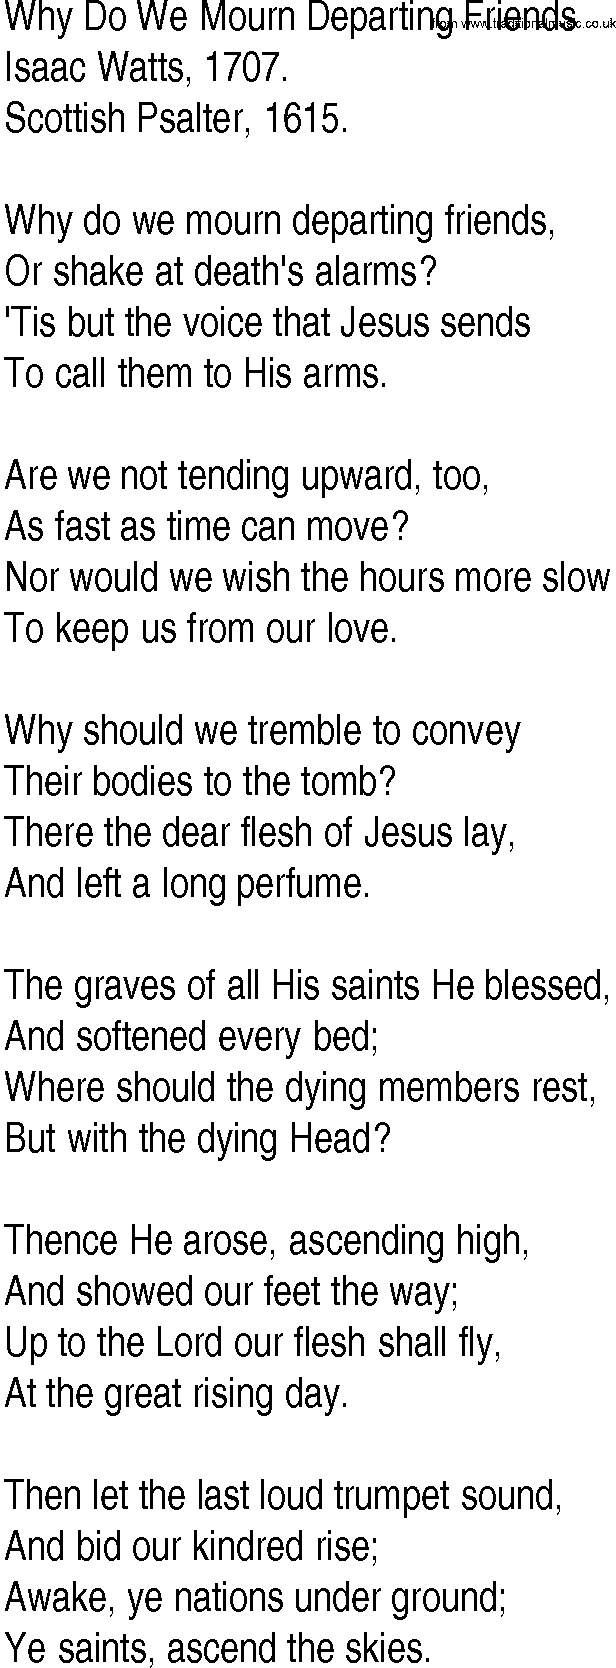 Hymn and Gospel Song: Why Do We Mourn Departing Friends by Isaac Watts lyrics